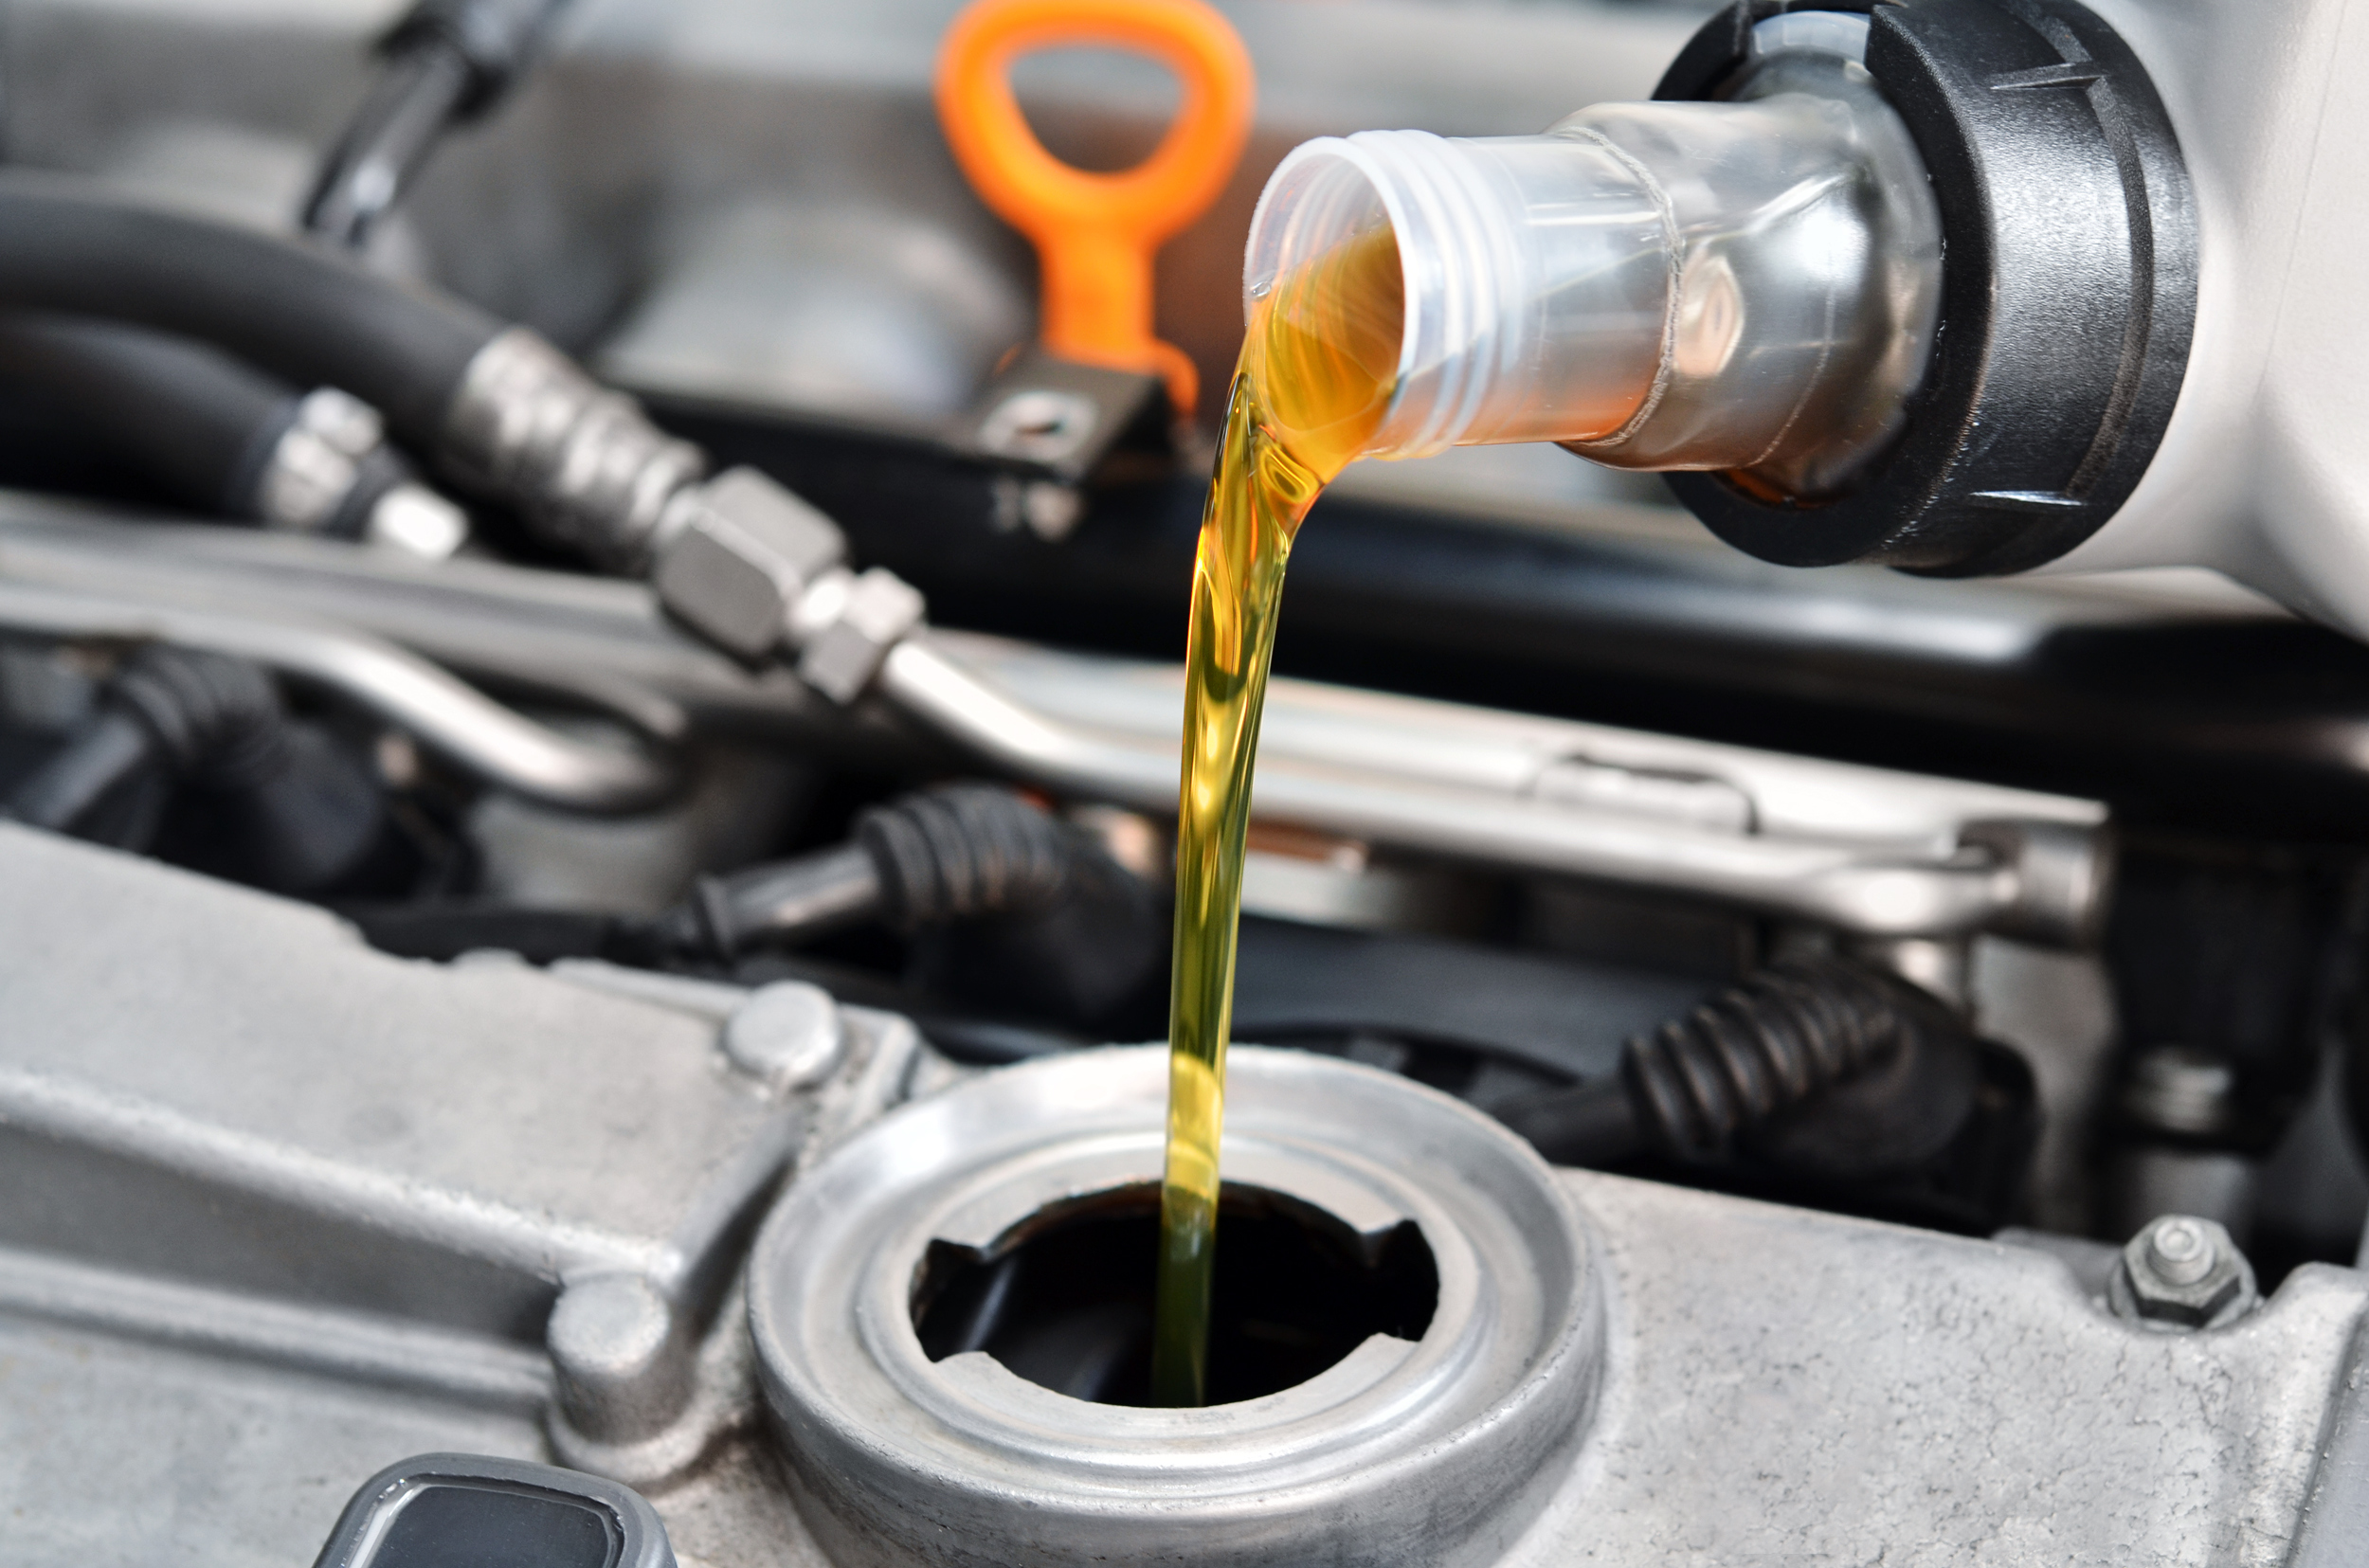 Avl idiom killing 4 Key Qualities of an Automotive Oil Filter - Evans Tire & Service Centers